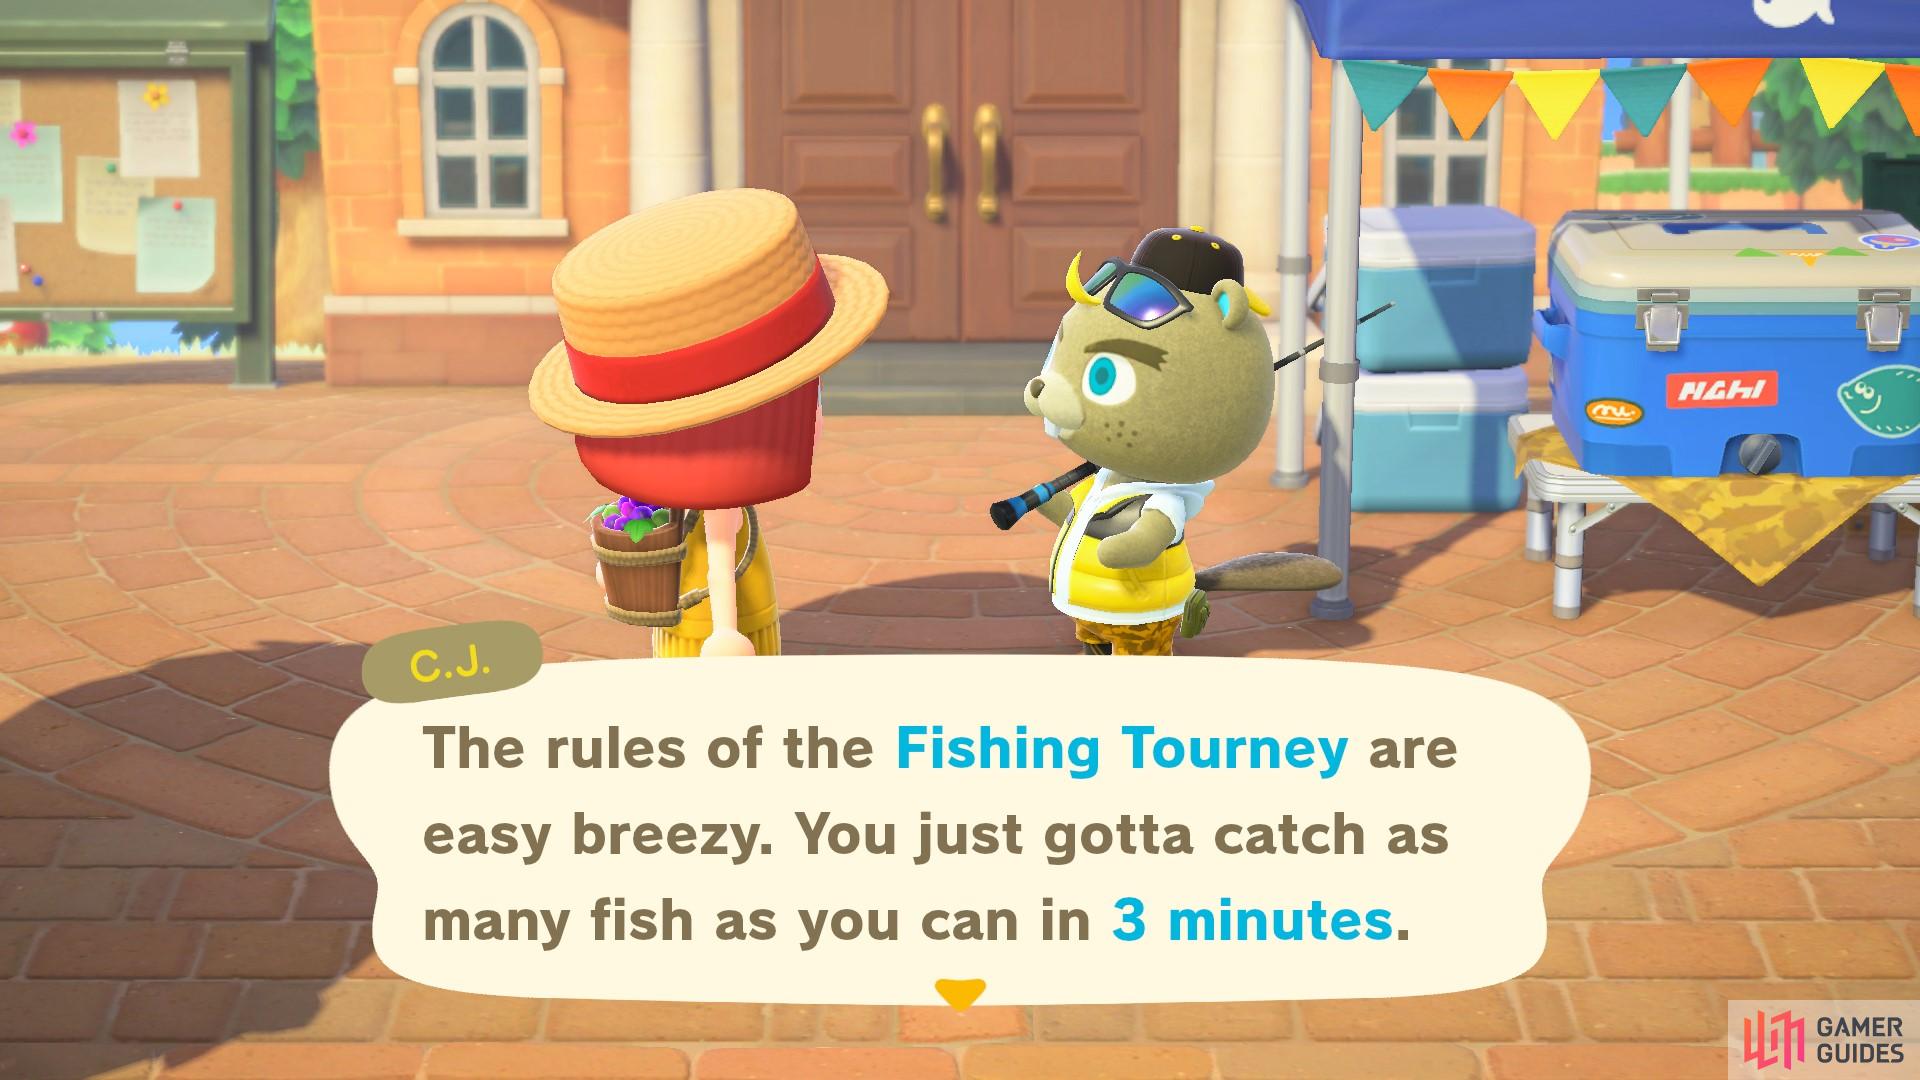 Catch as many fish as you can in 3 minutes!